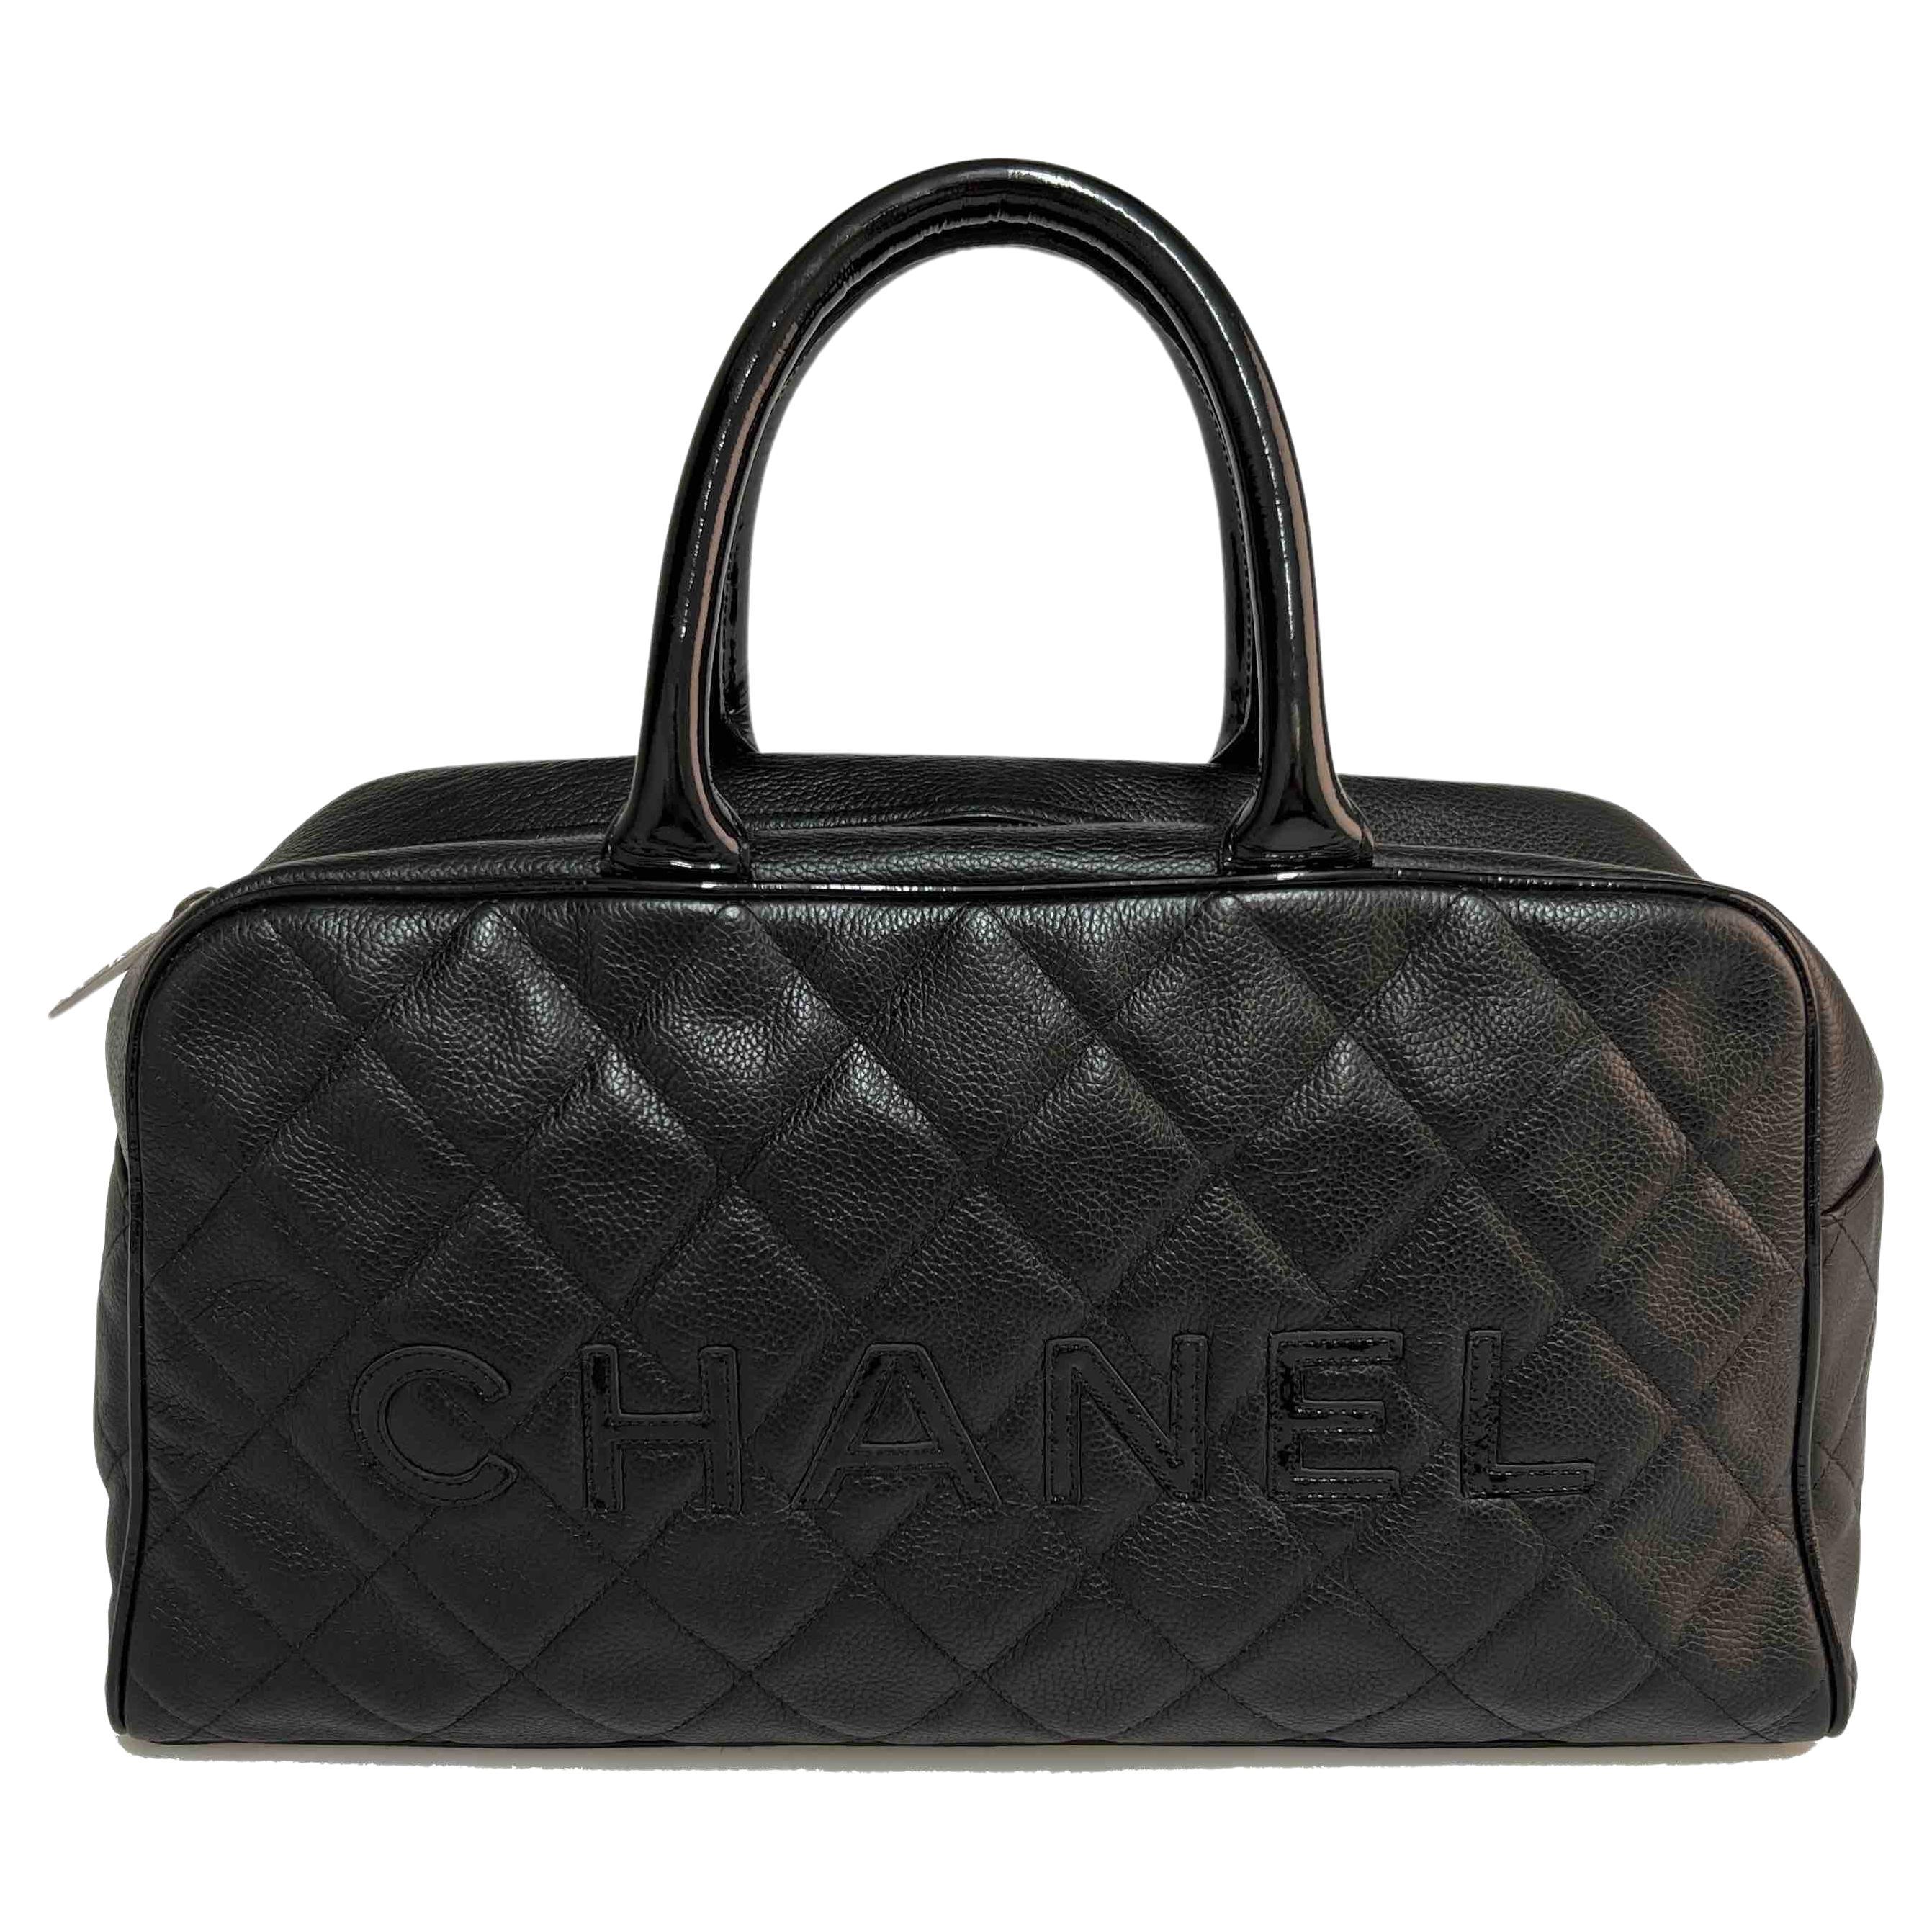 Vintage CHANEL Bowling Bag in Black Grained Leather.